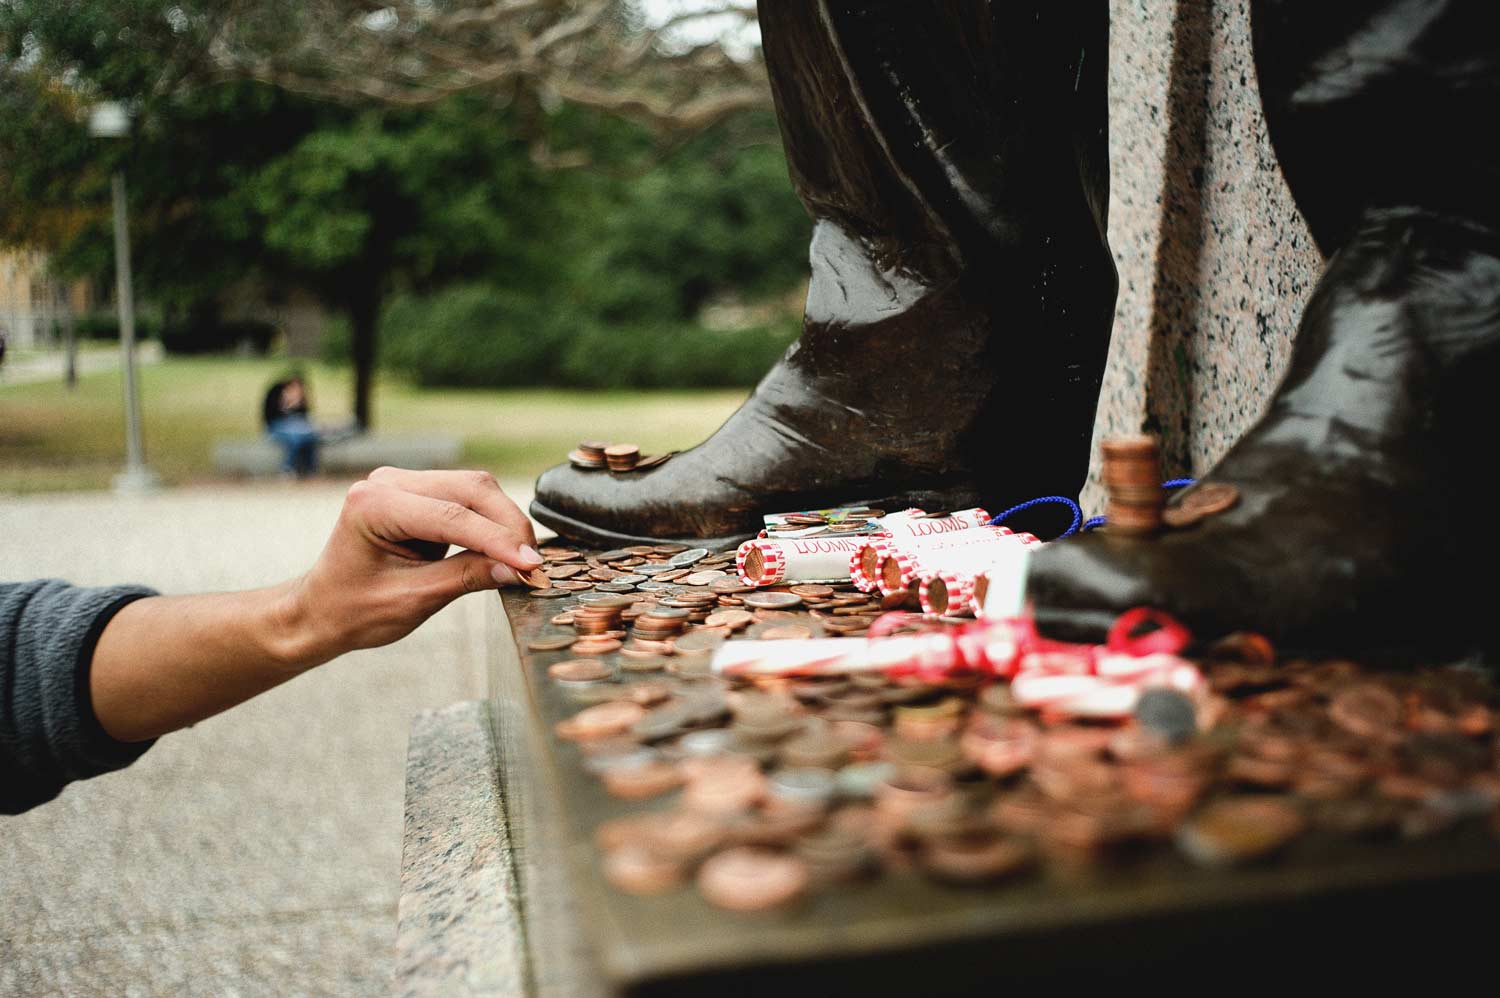 Student puts pennies on the base of the Sul Ross statue for good luck before a test